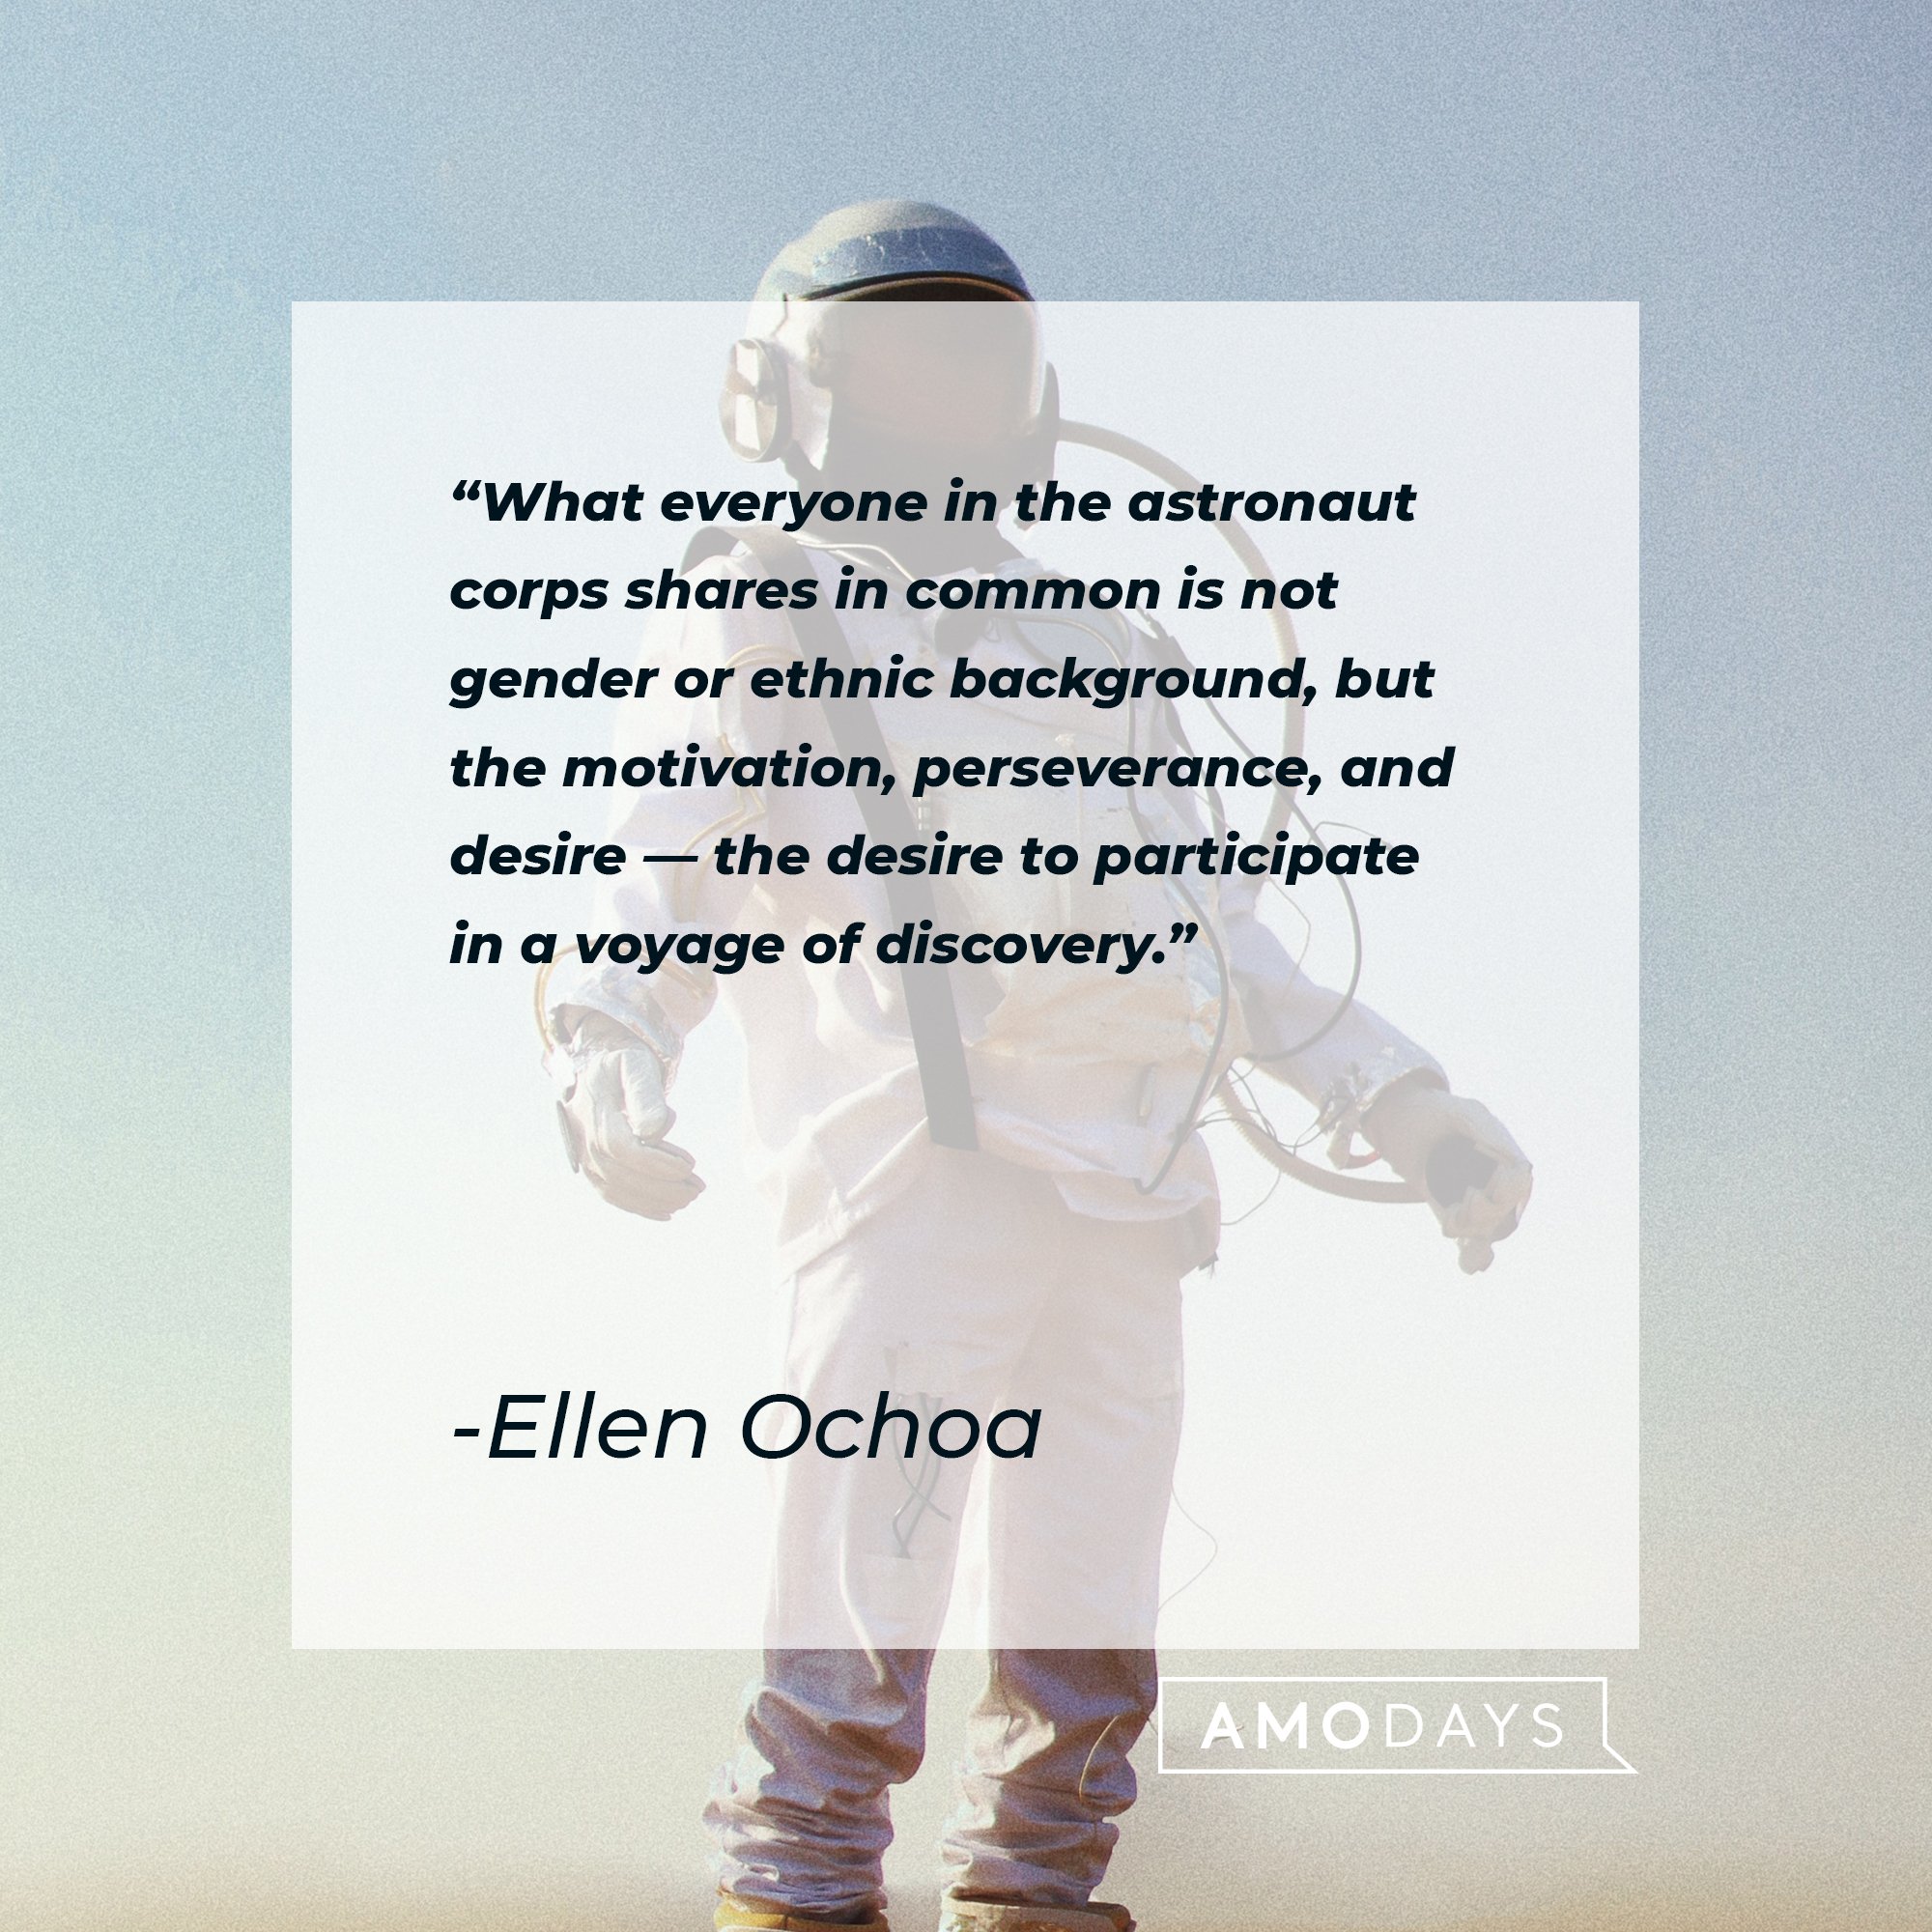  Ellen Ochoa's quote: "What everyone in the astronaut corps shares in common is not gender or ethnic background, but the motivation, perseverance, and desire — the desire to participate in a voyage of discovery." | Image: AmoDays